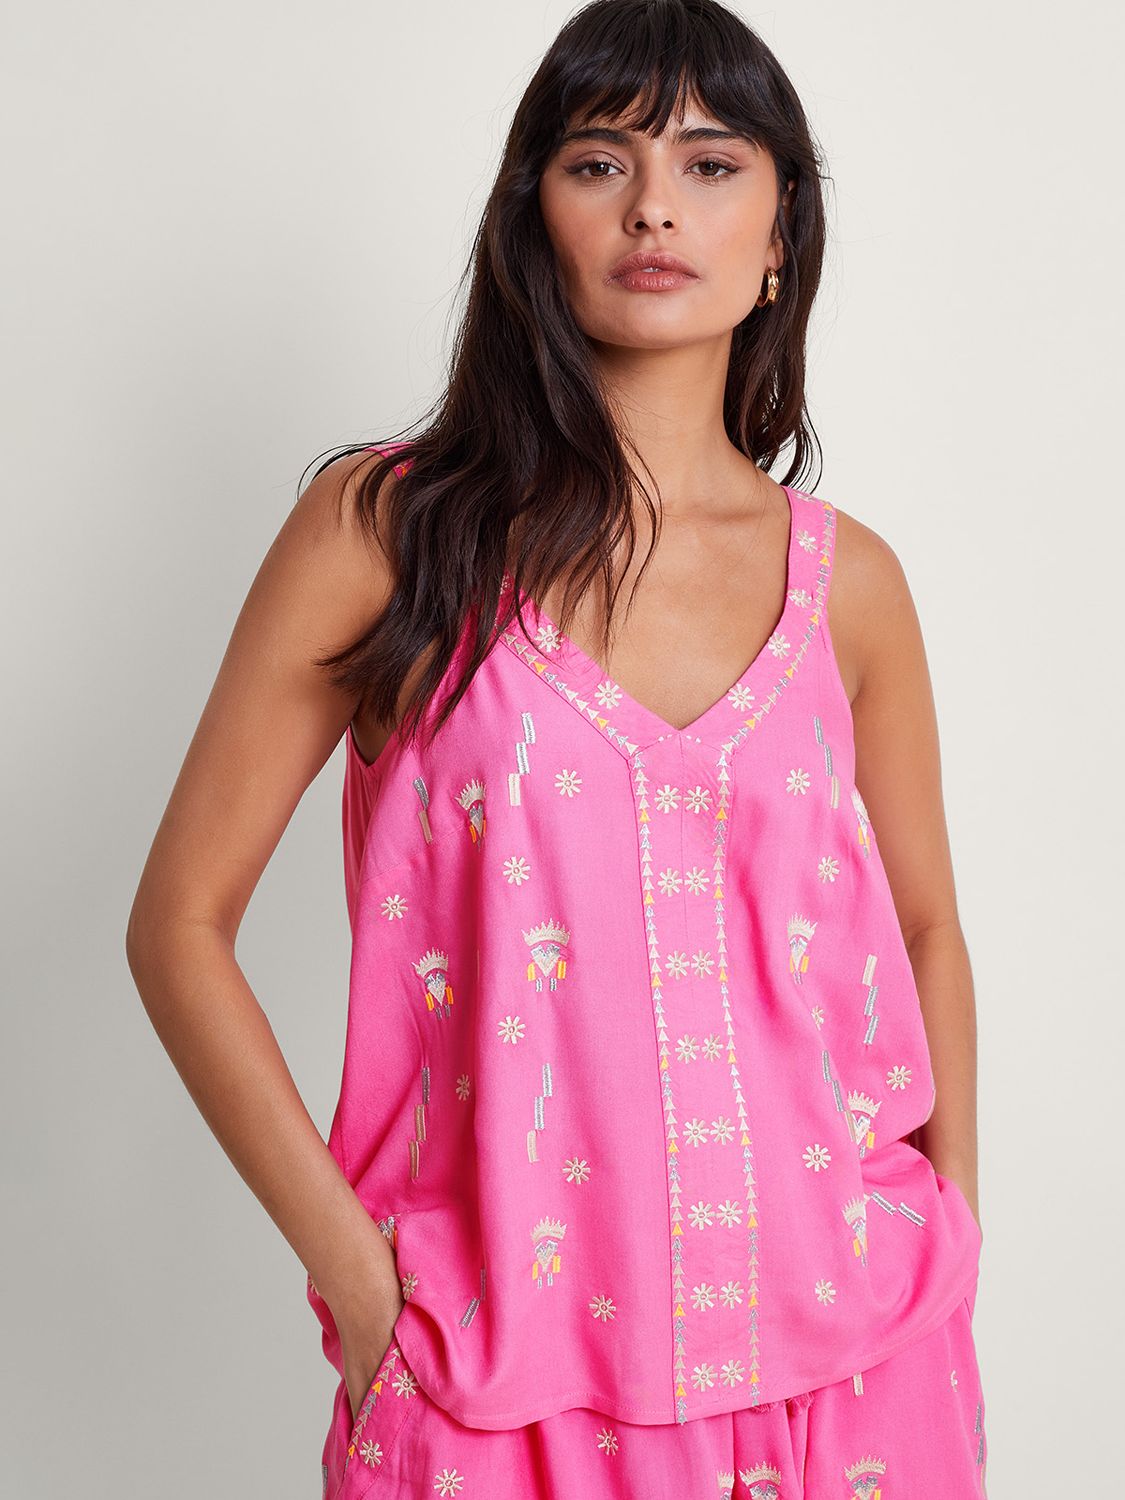 Geometric Abstract Embroidered Cami by Monsoon